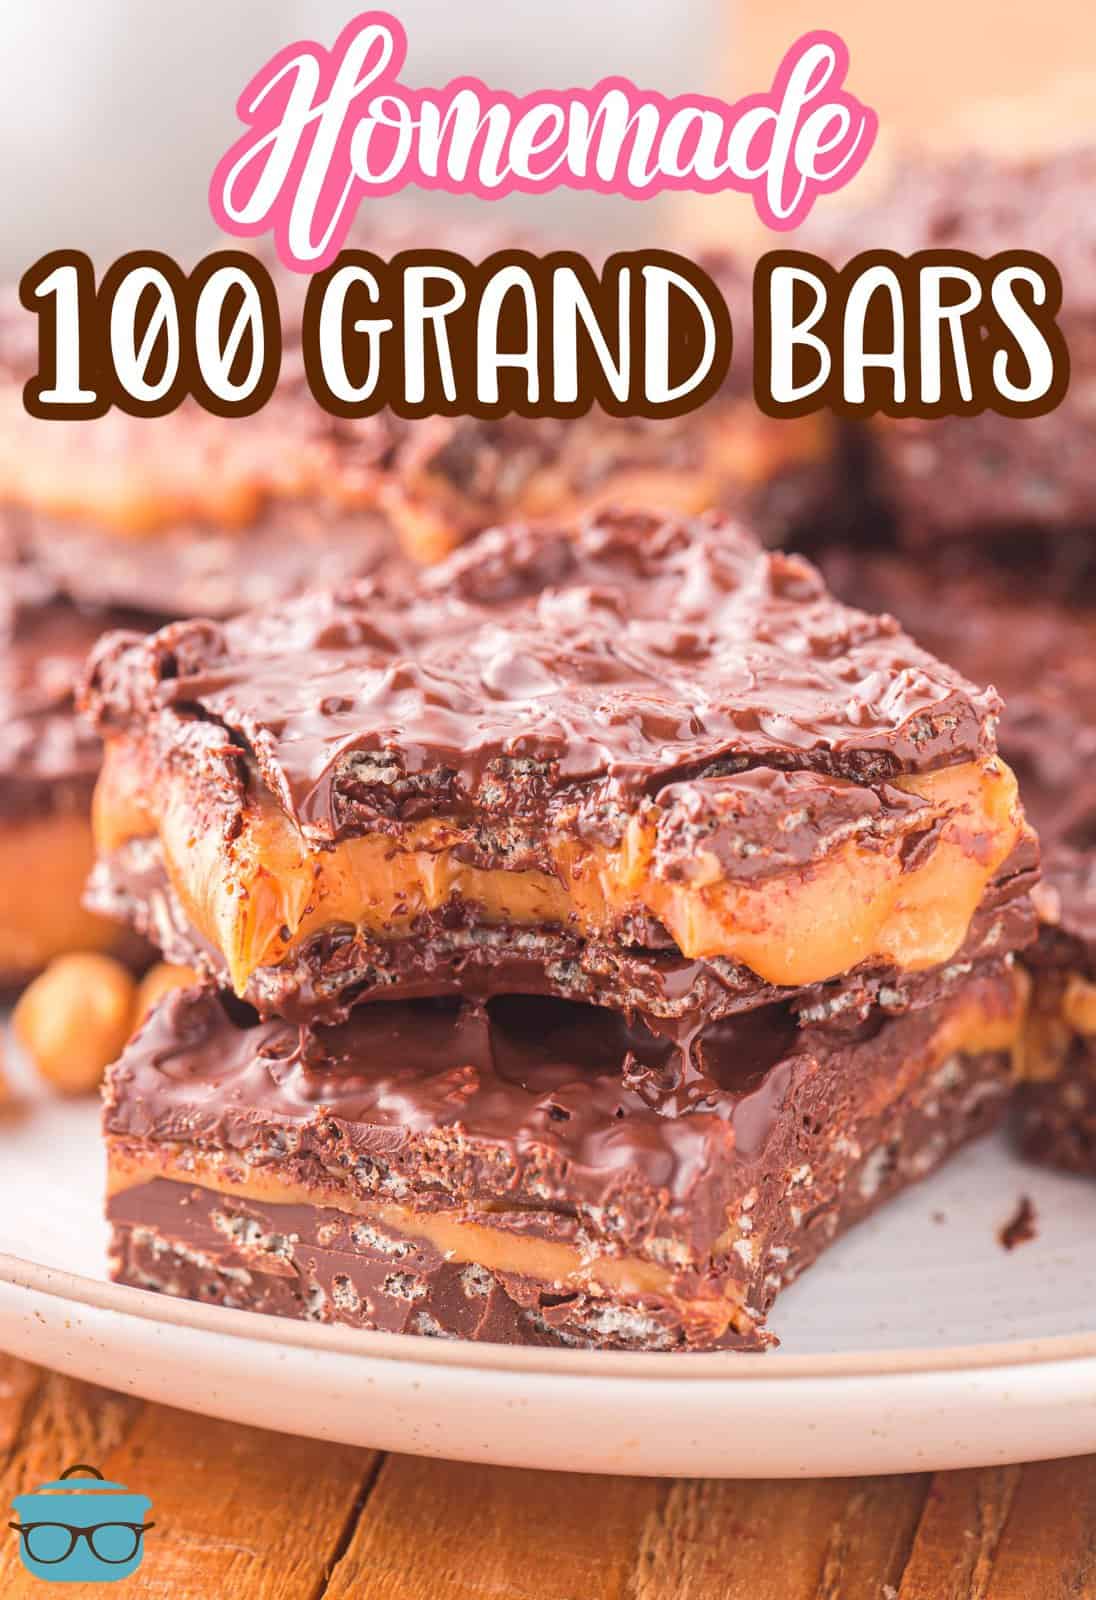 A plate with two homemade 100 Grand Bars, one with a bite taken out.